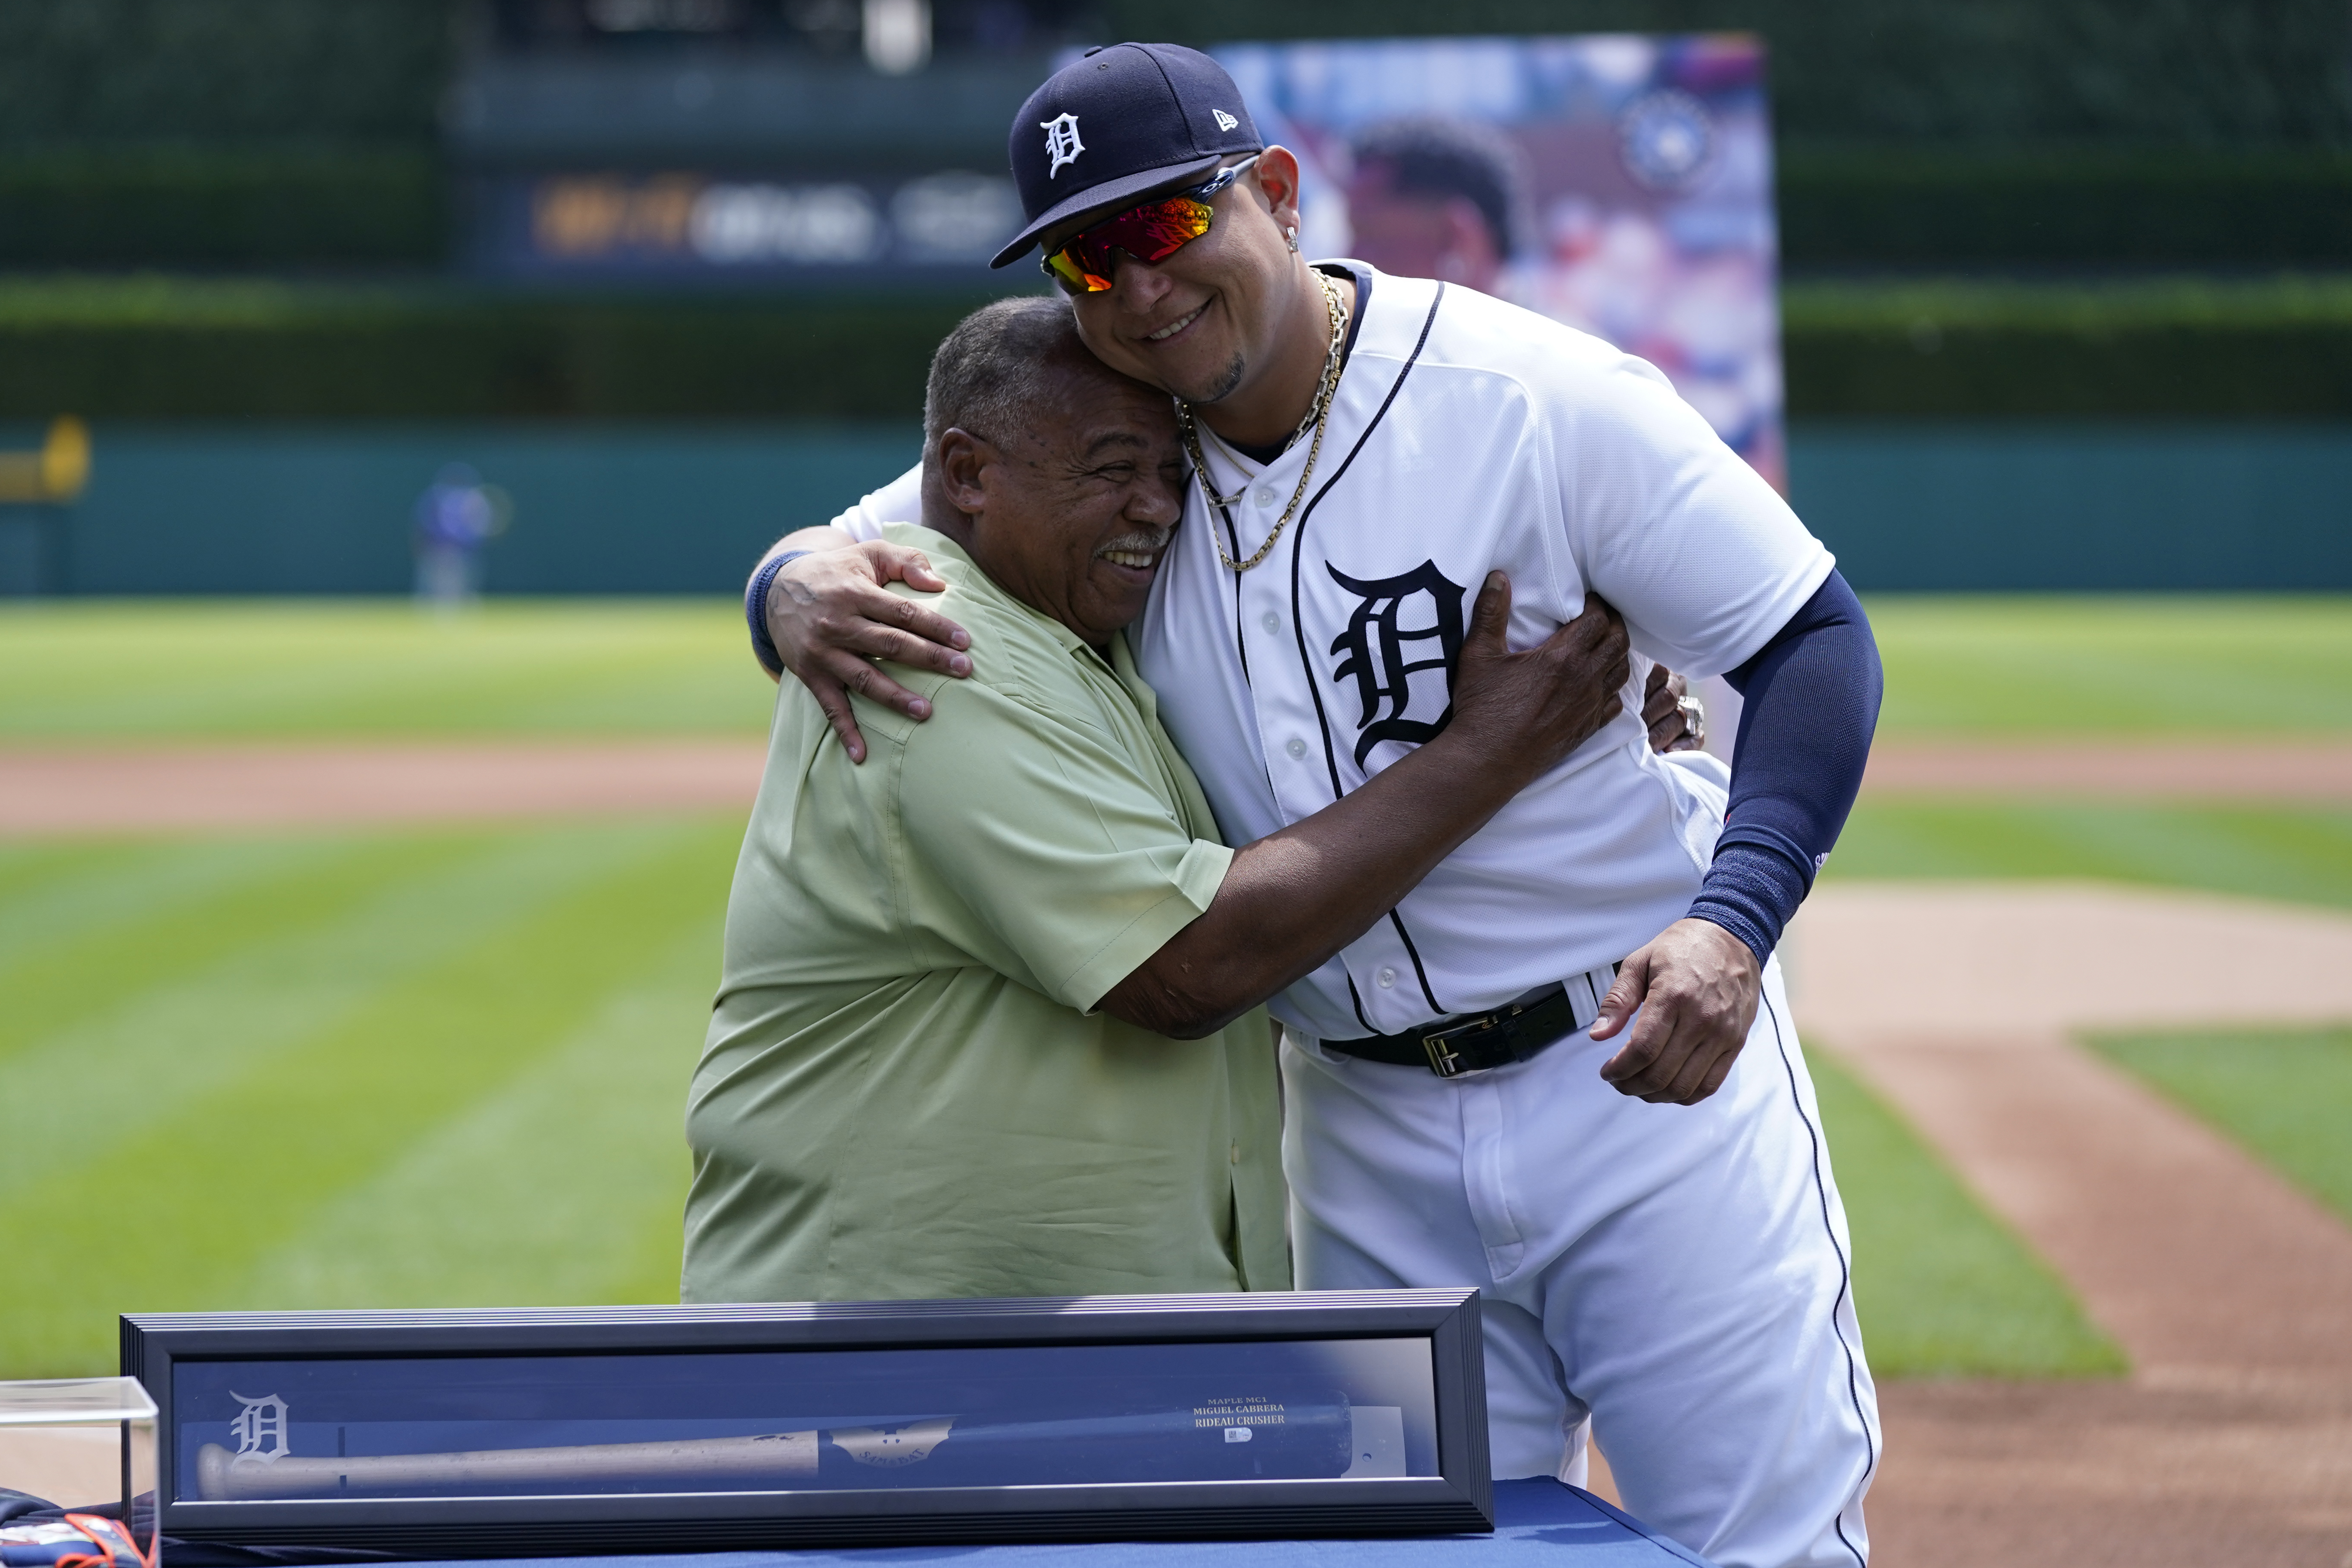 Tigers legend selected to serve as honorary coach at All-Star game 